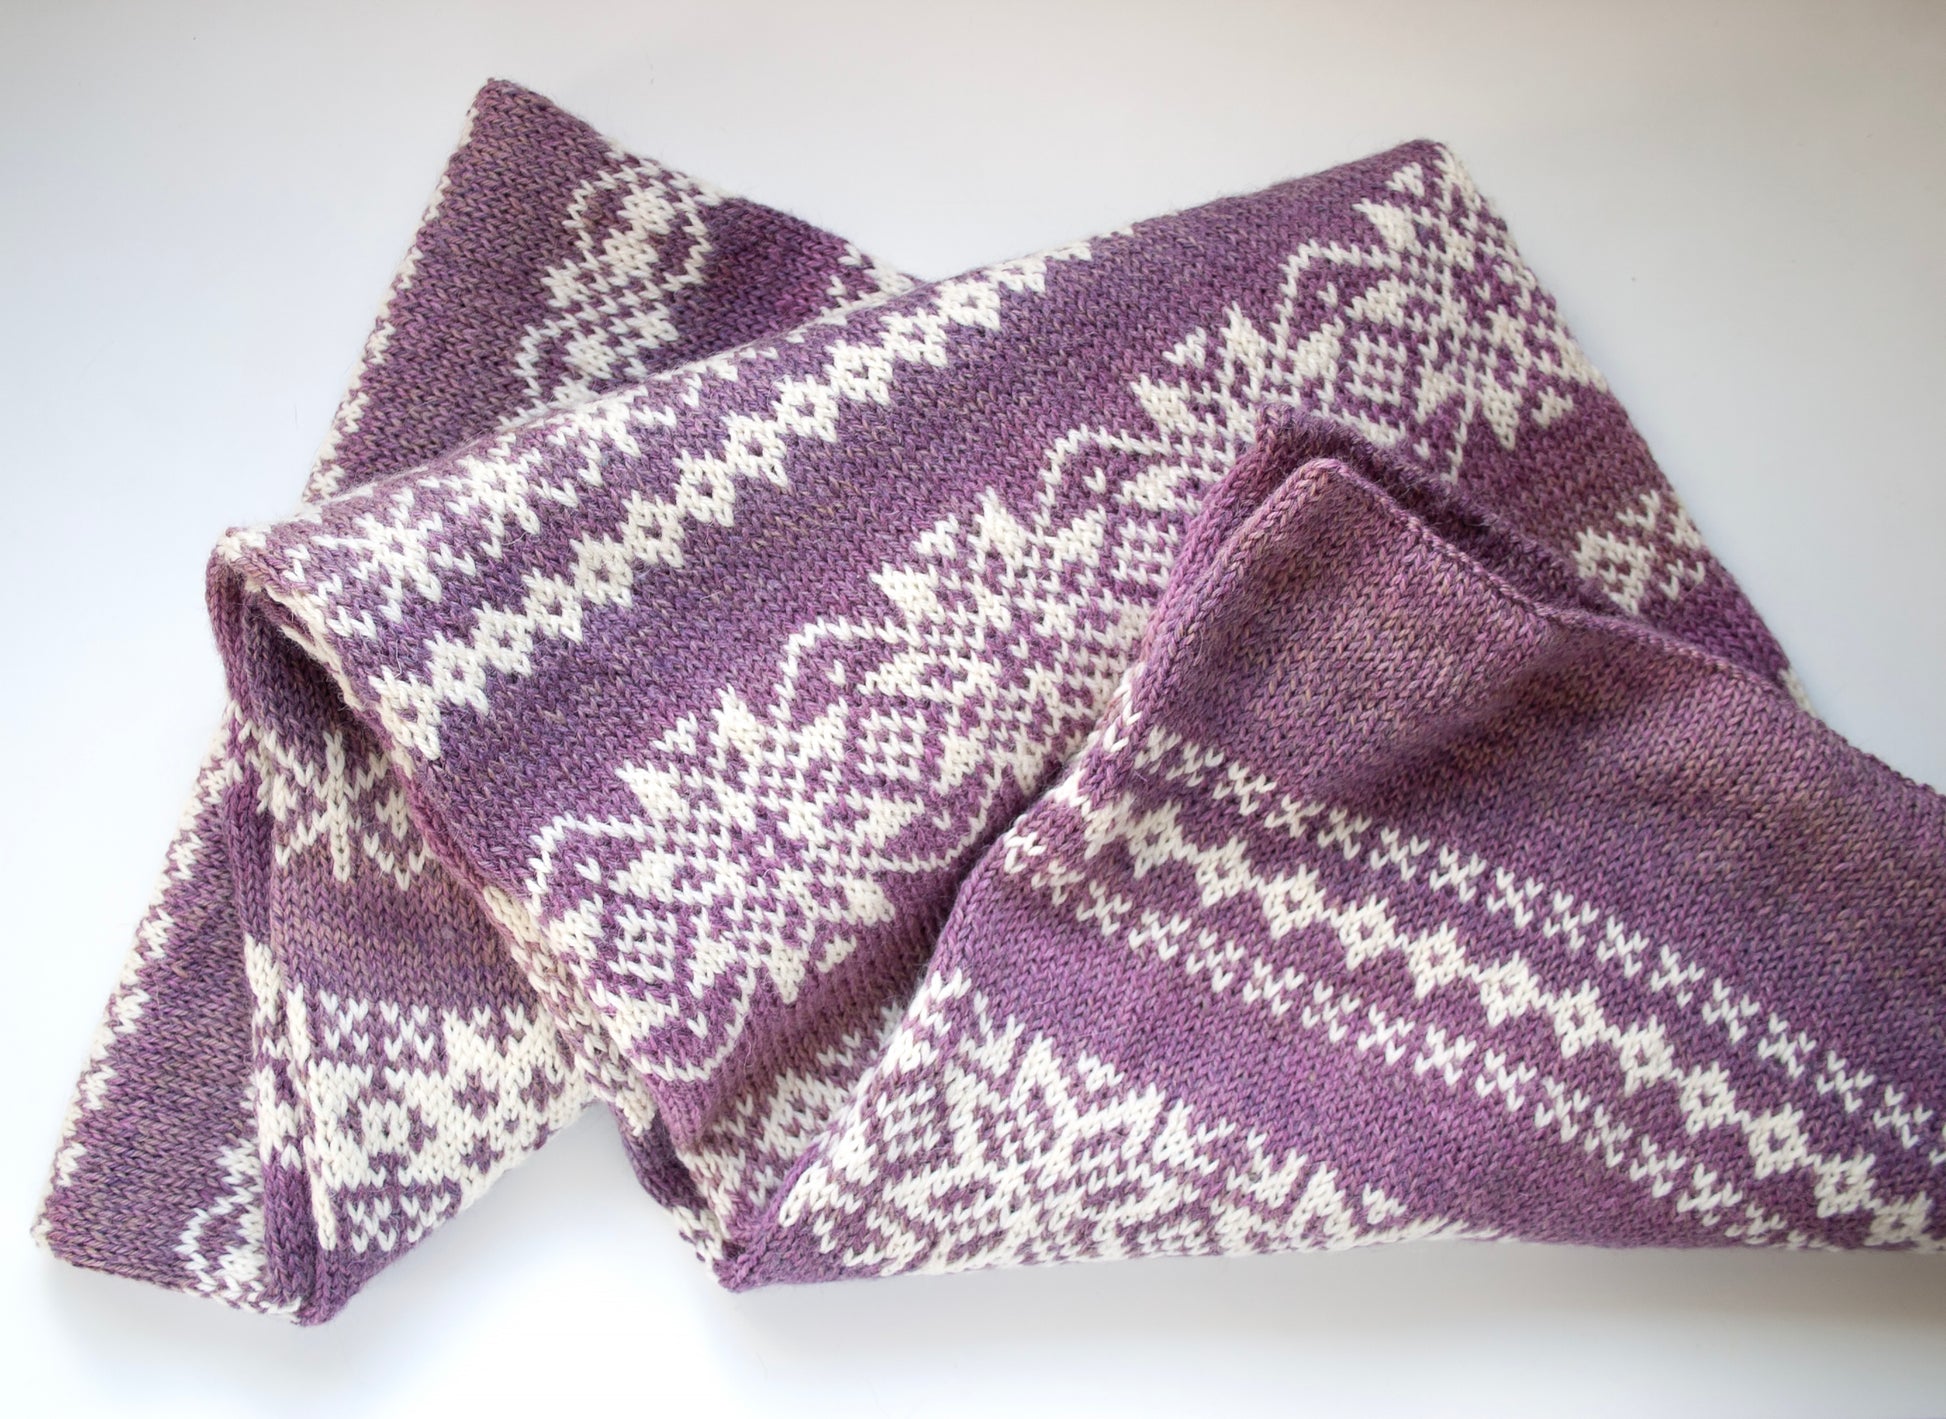 details of gradient purple and white wool hole hand-knitted Fair isle scarf in snowflake knitting pattern